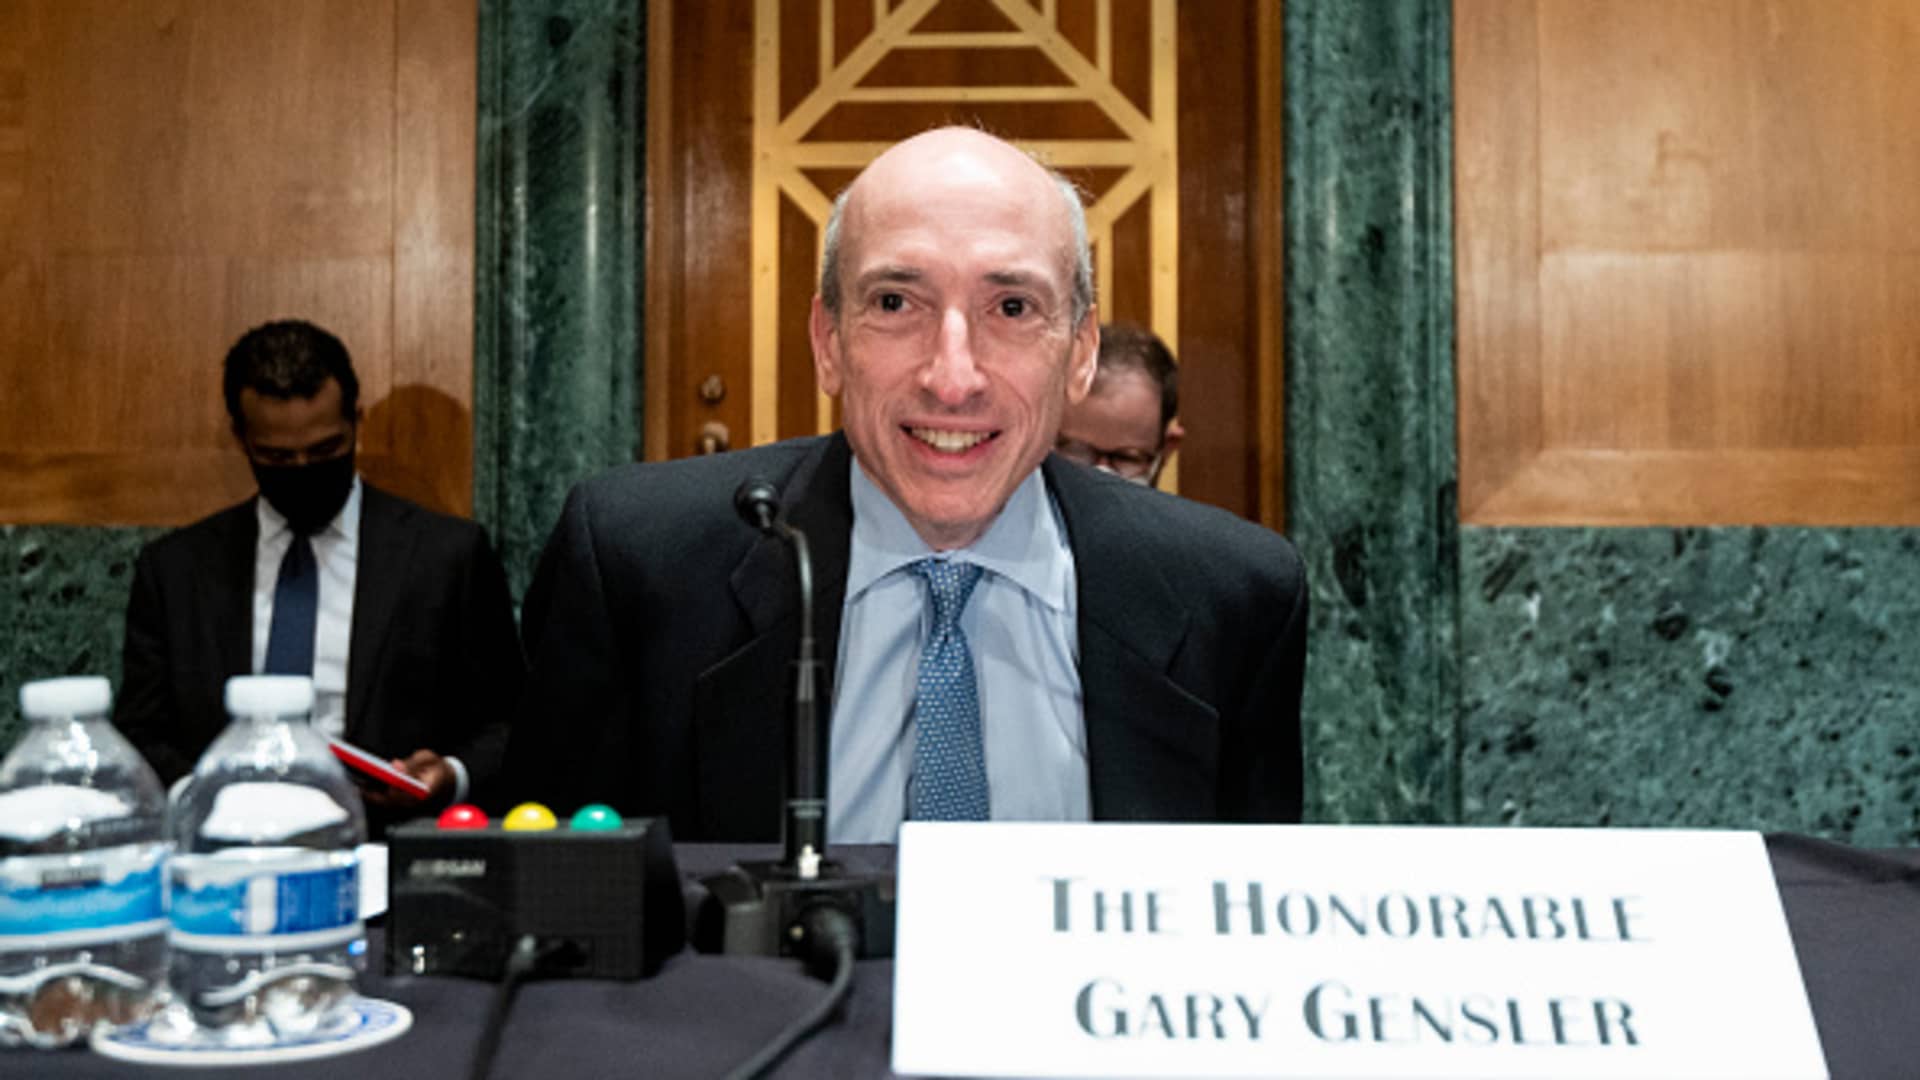 SEC's Gensler in congressional hot seat today over climate change and crypto